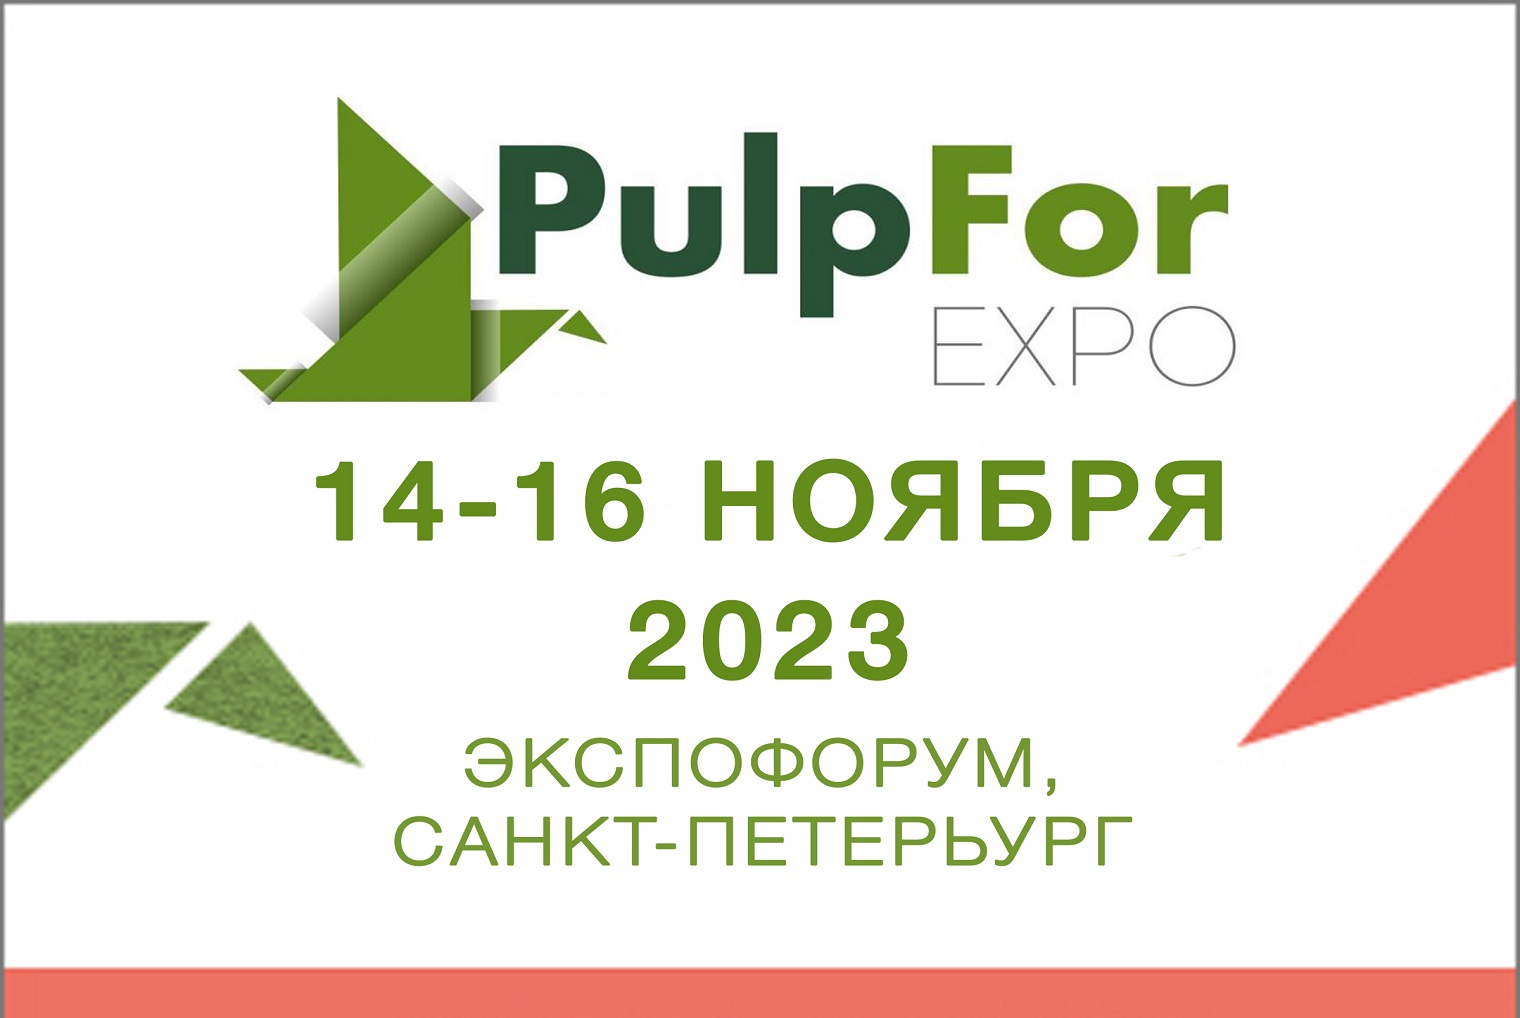 My project | PulpFor 2023